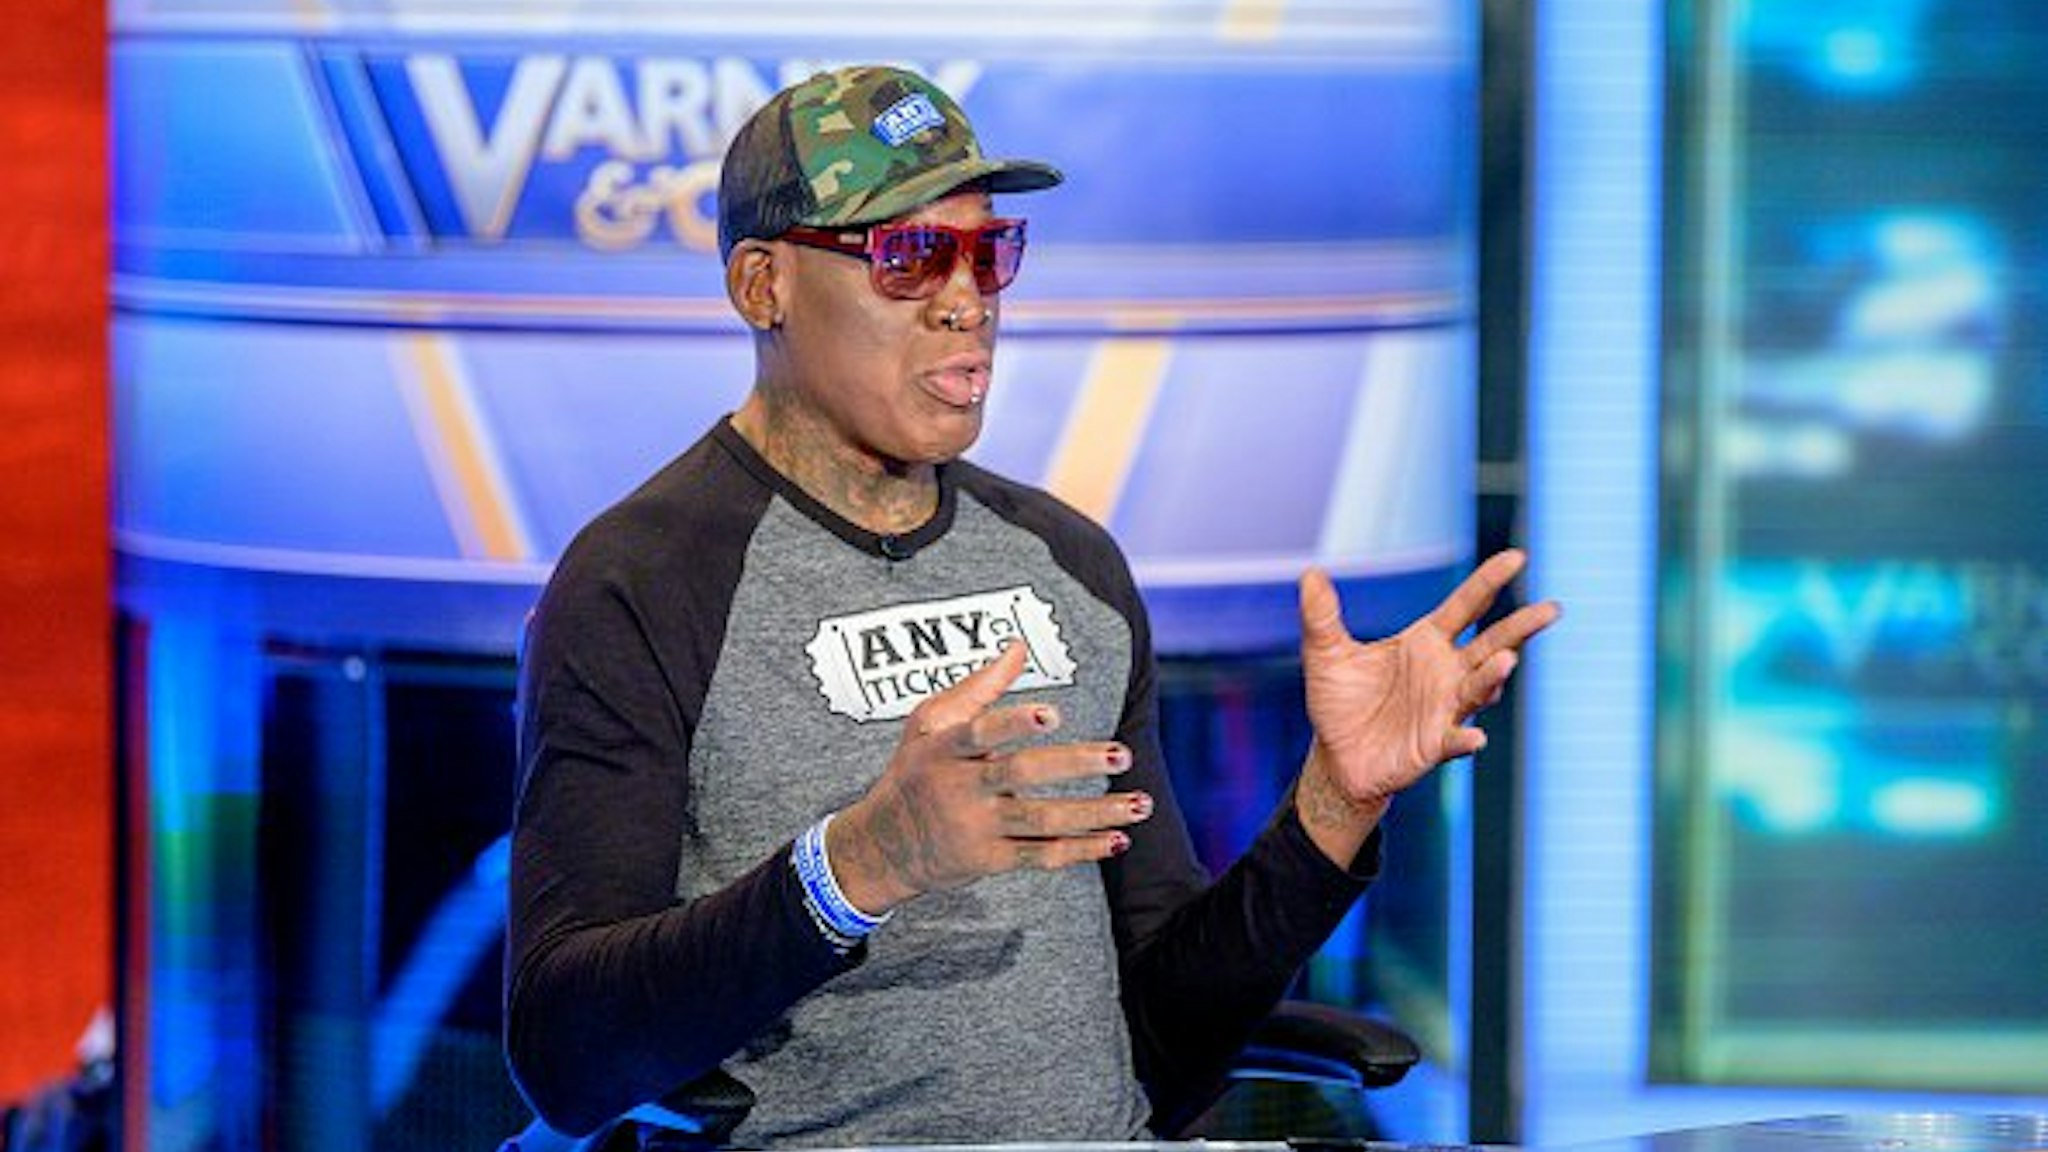 Former NBA Basketball player Dennis Rodman Visits "Varney & Co." with guest-host David Asman at Fox Business Network Studios on September 18, 2019 in New York City.